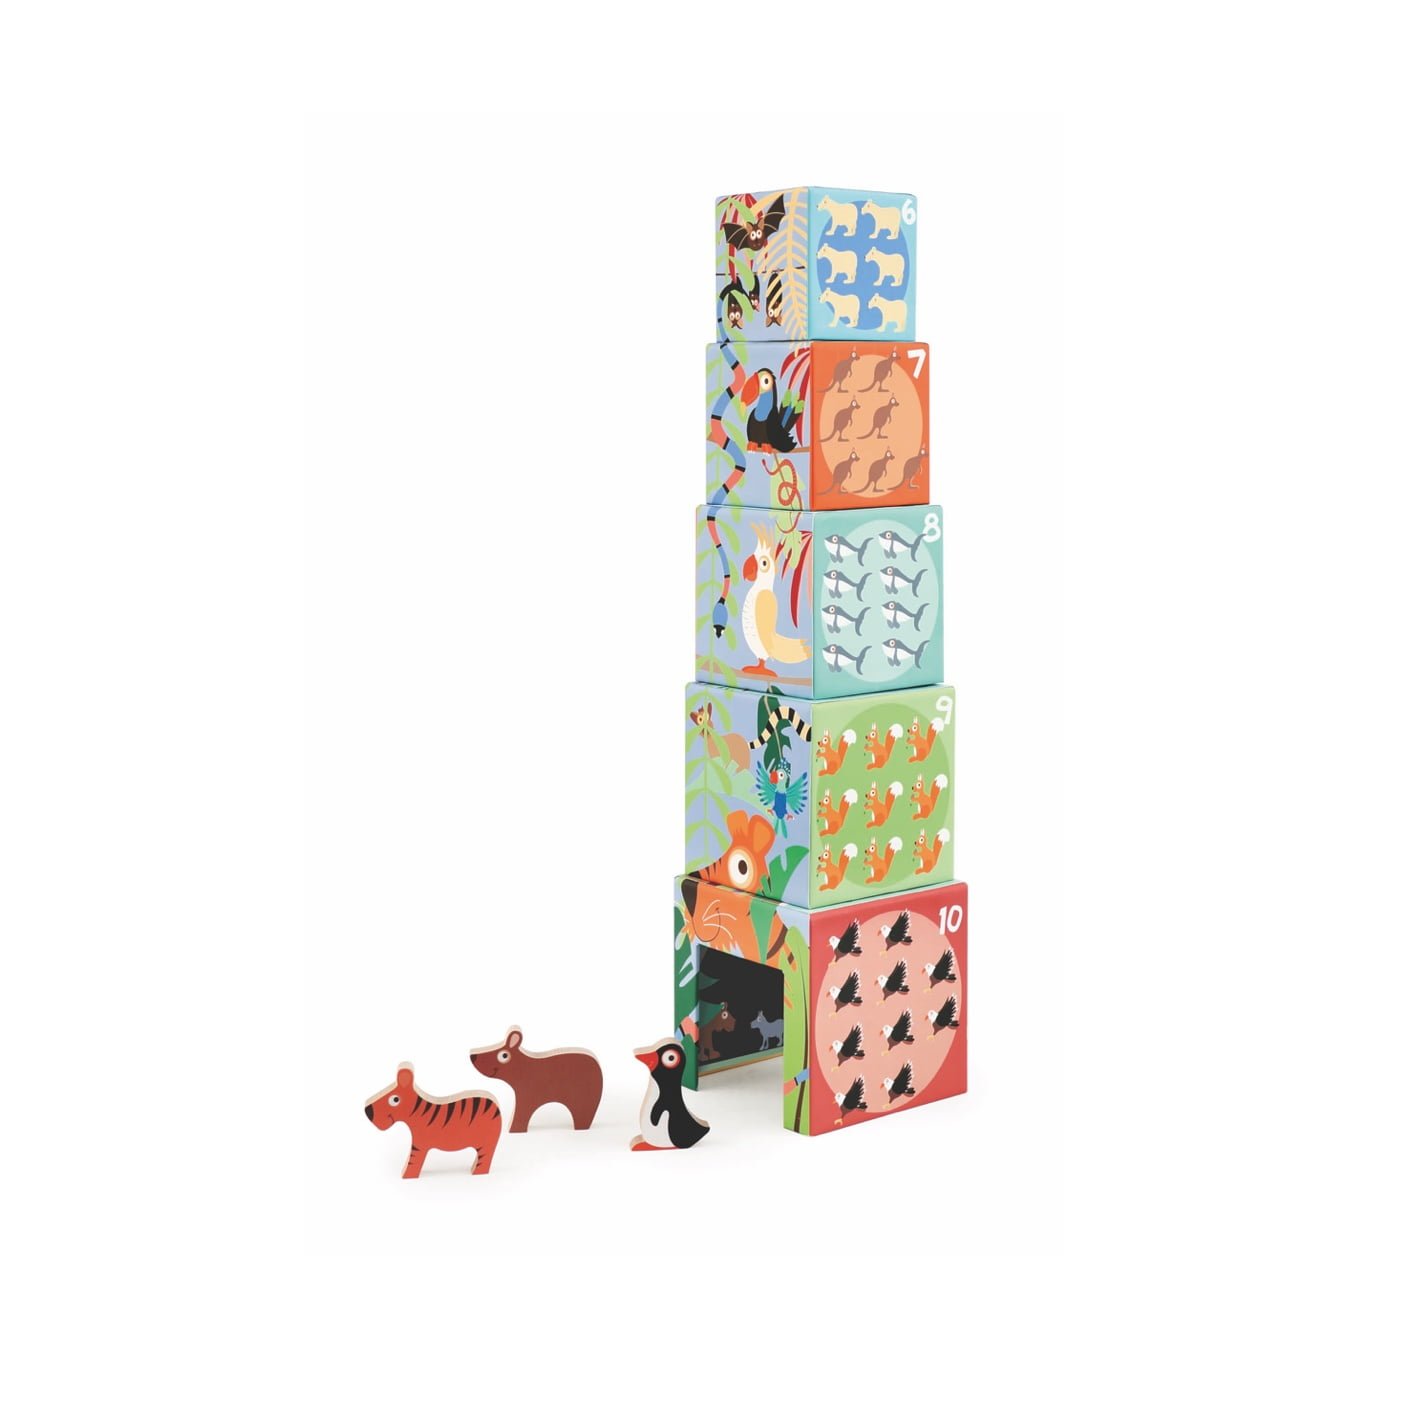 Stacking tower with animals - Animals of the world